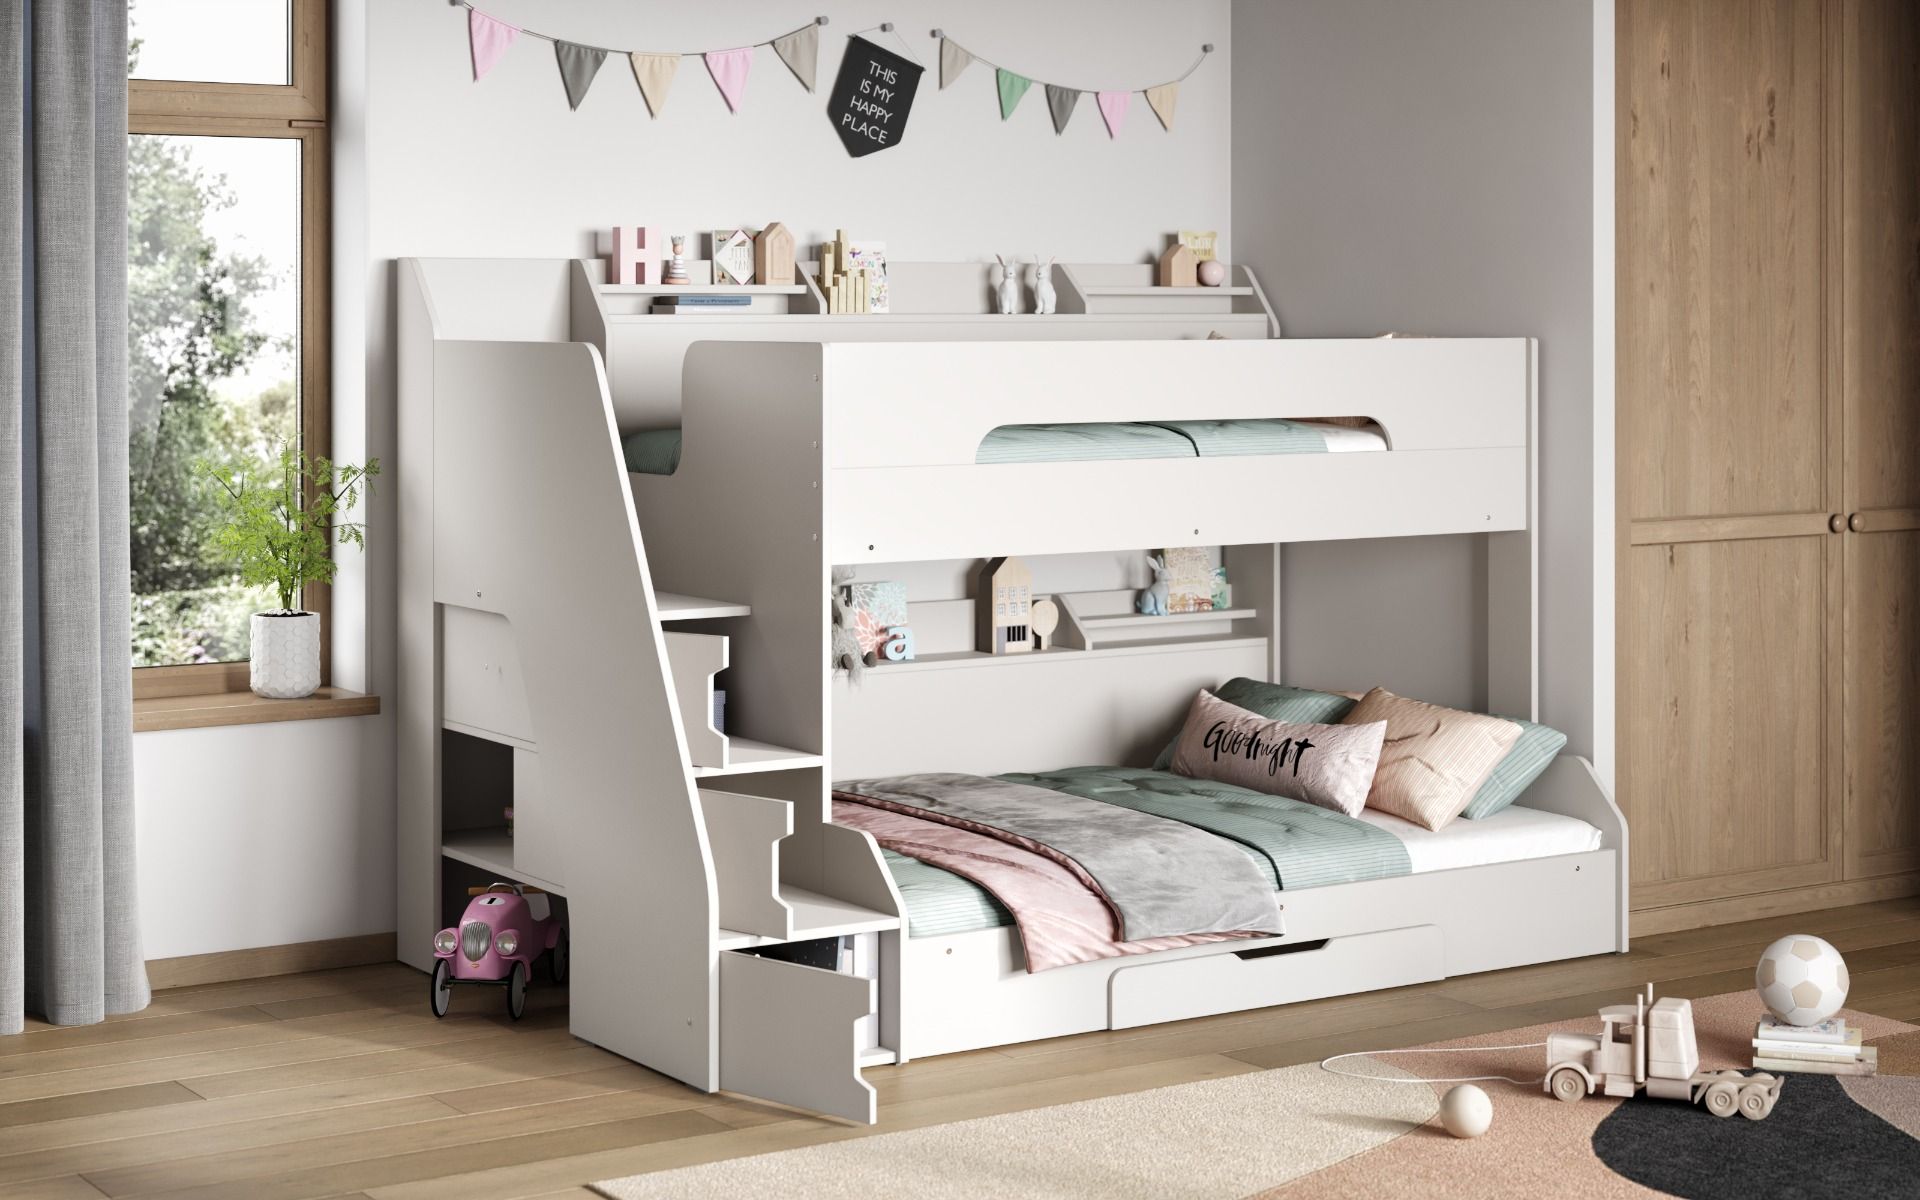 Flair Slick Staircase Triple Bunk Bed - White